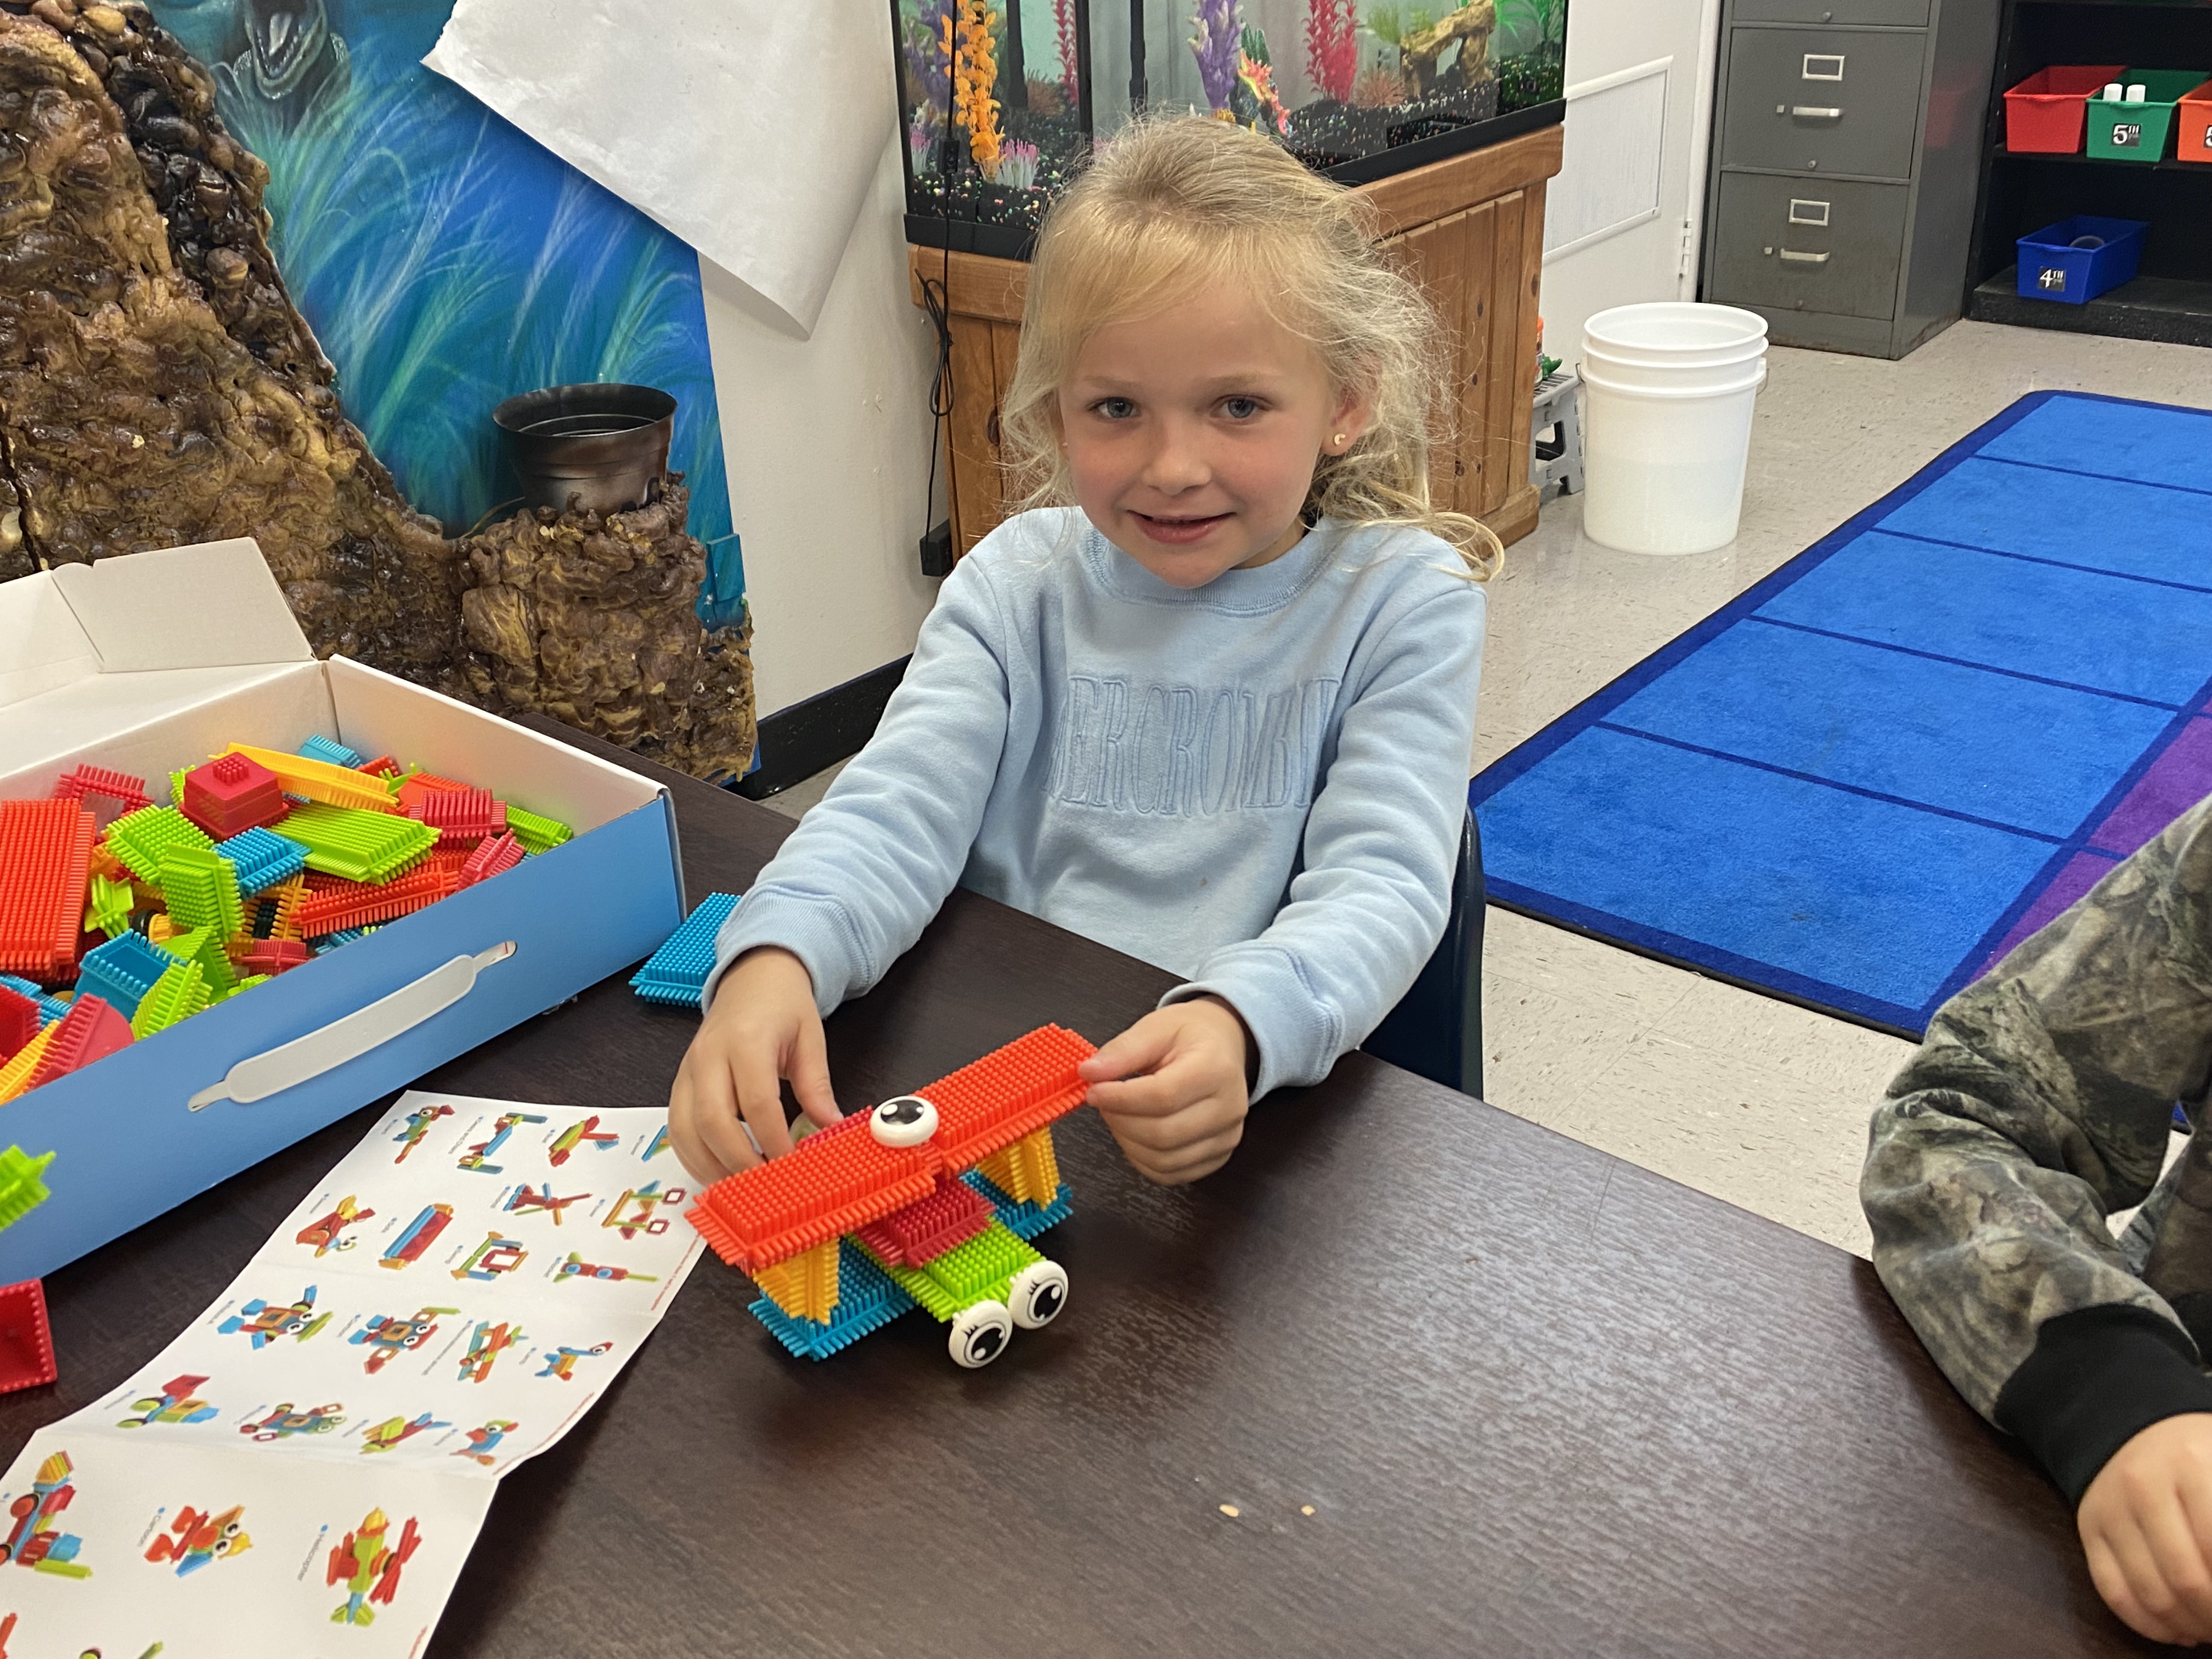 Kindergarten students exploring how to be an engineer with Bristle toys.